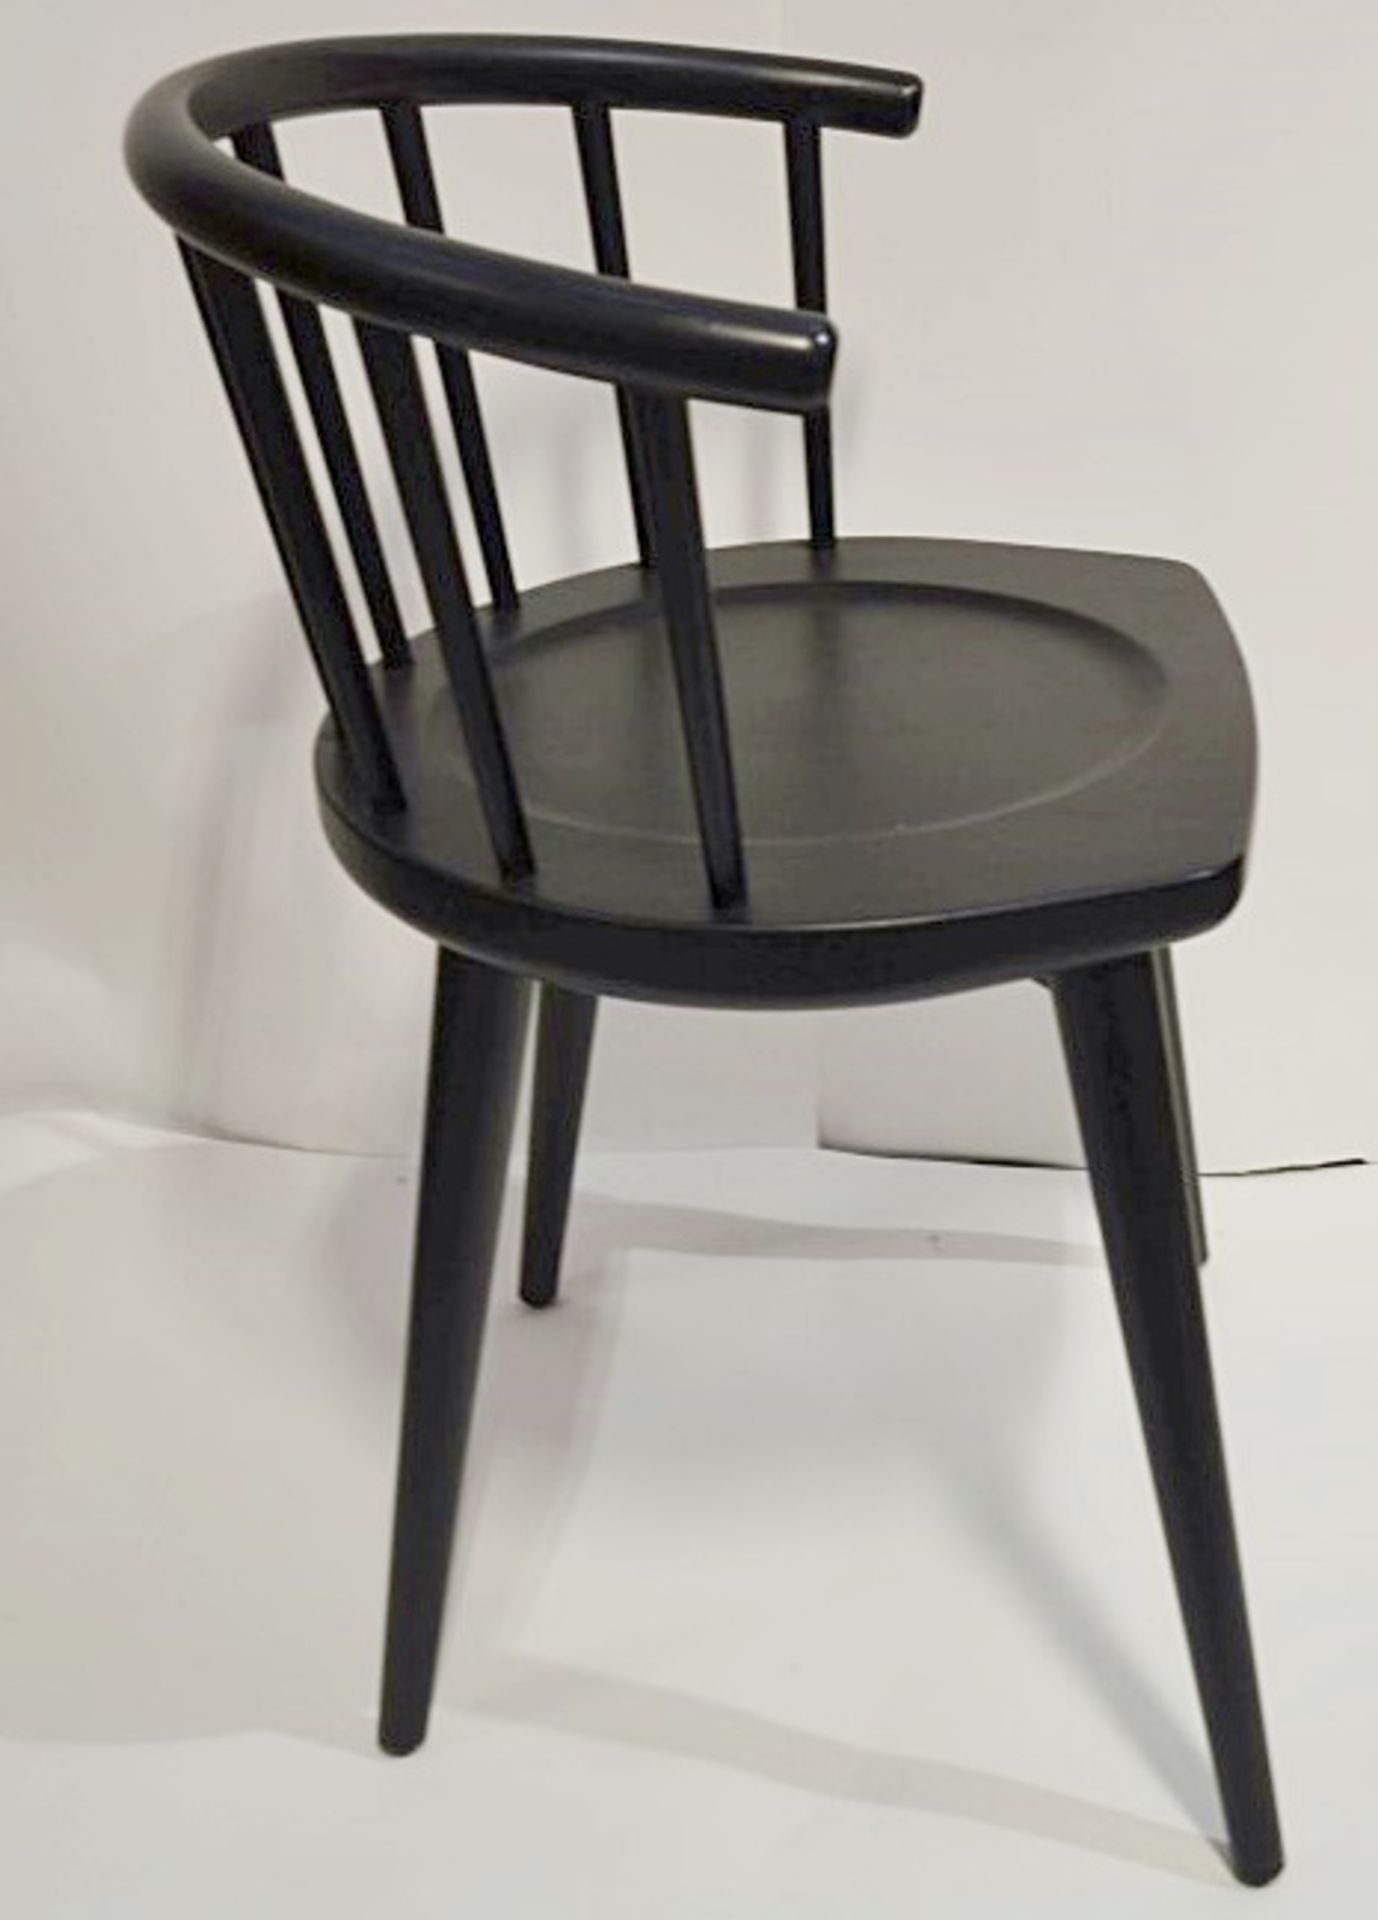 7 x Wooden Dining Chairs With Spindle Backs - Dimensions: H73 x W59 x D43cm, Seat Height: 45cm -